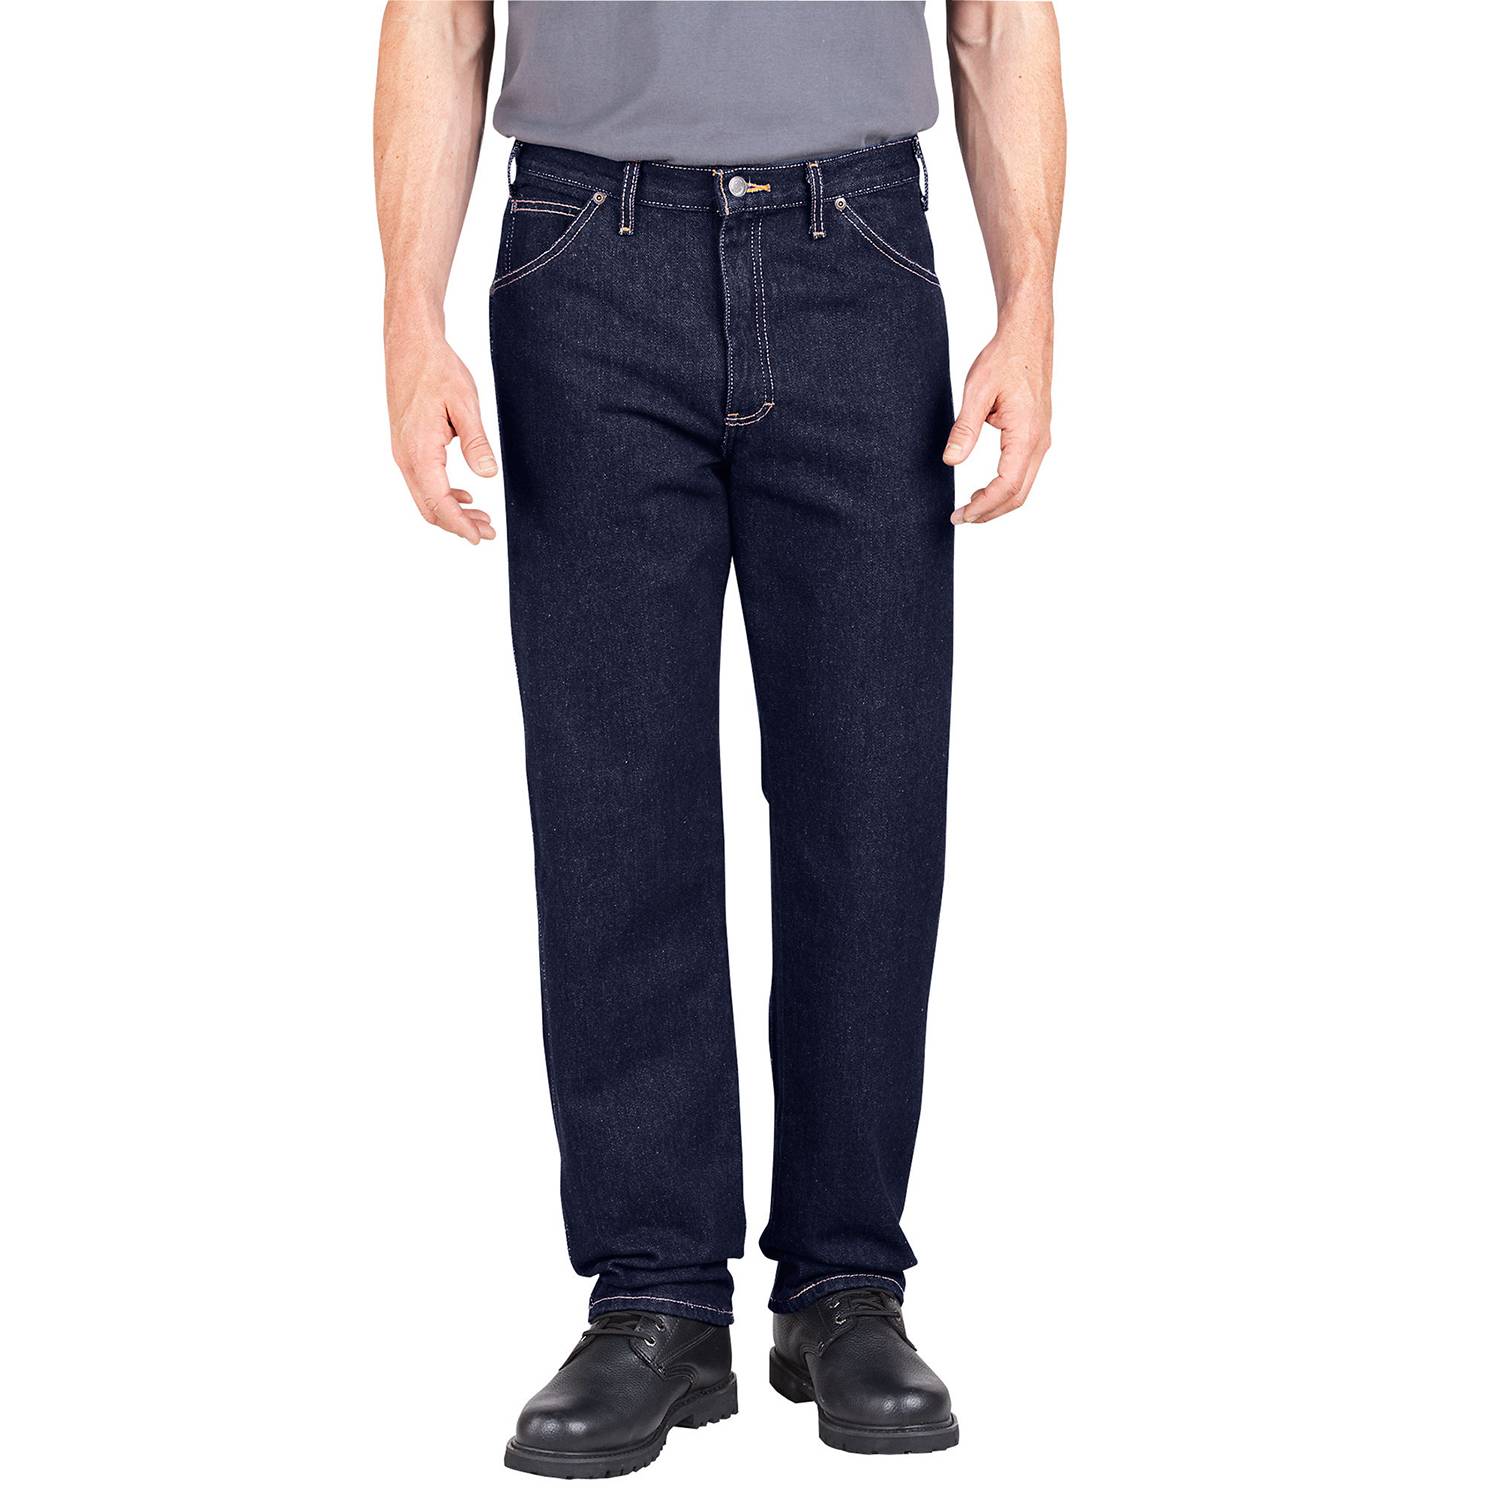 Dickies Industrial Relaxed Fit Denim Jeans